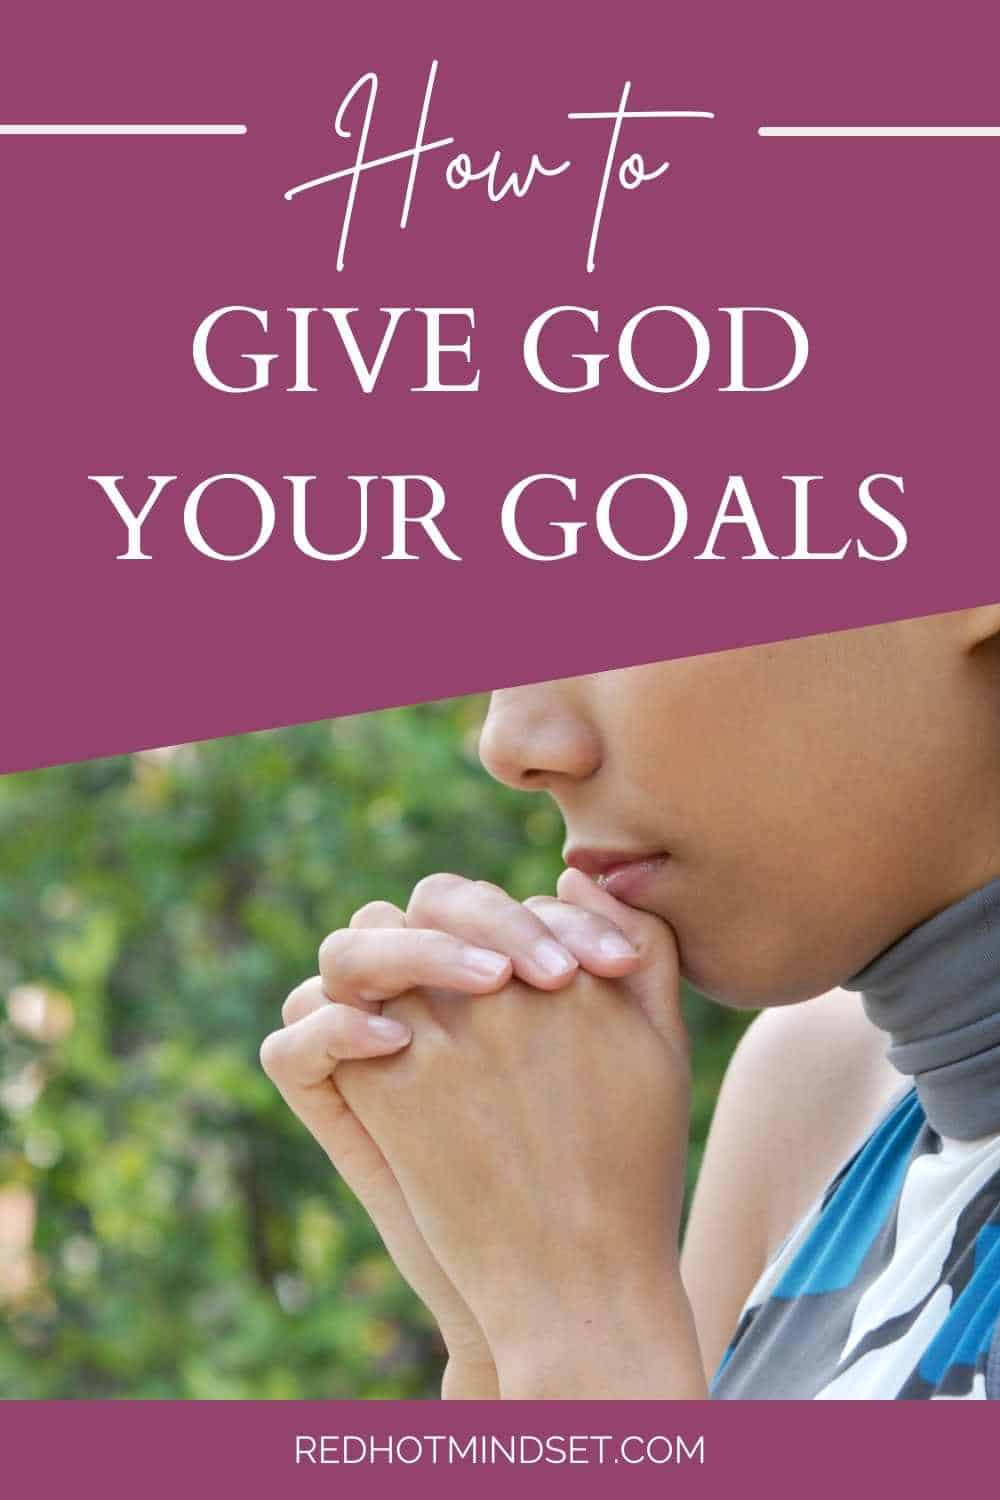 Ep 134 | Give God Your Goals and Daily To-Do List and Let HIM Lead